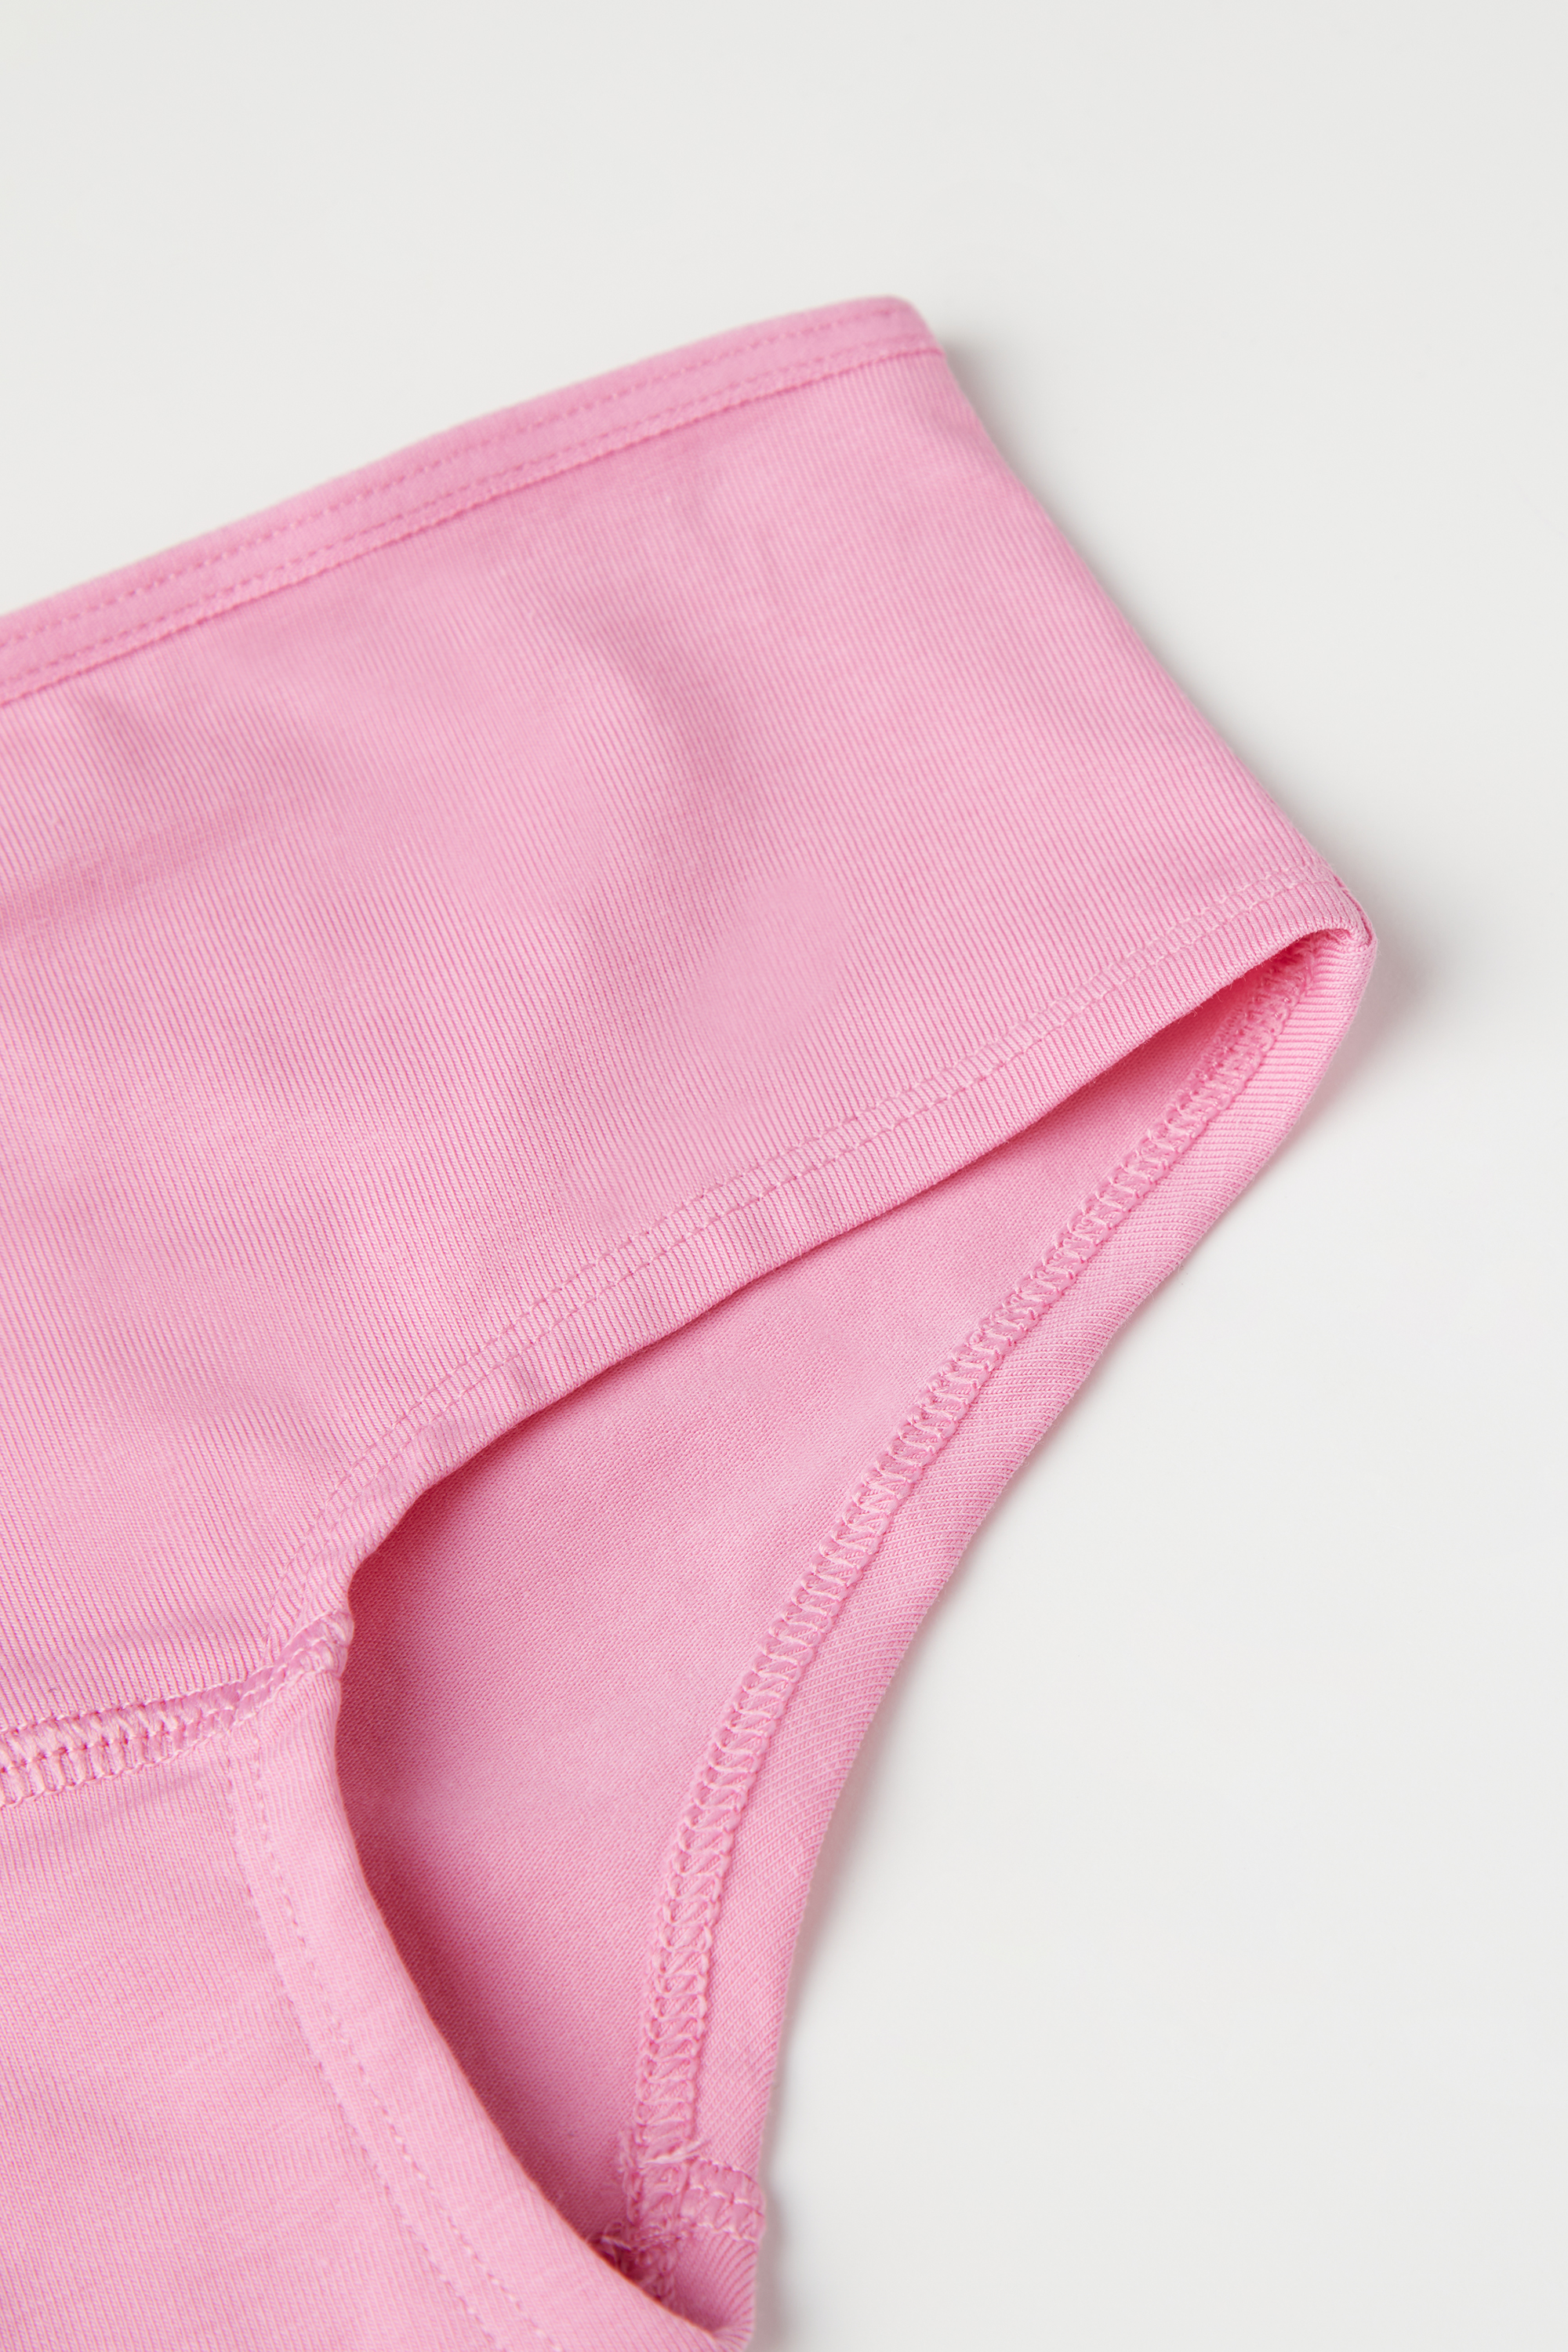 Girls’ Basic Cotton French Knickers